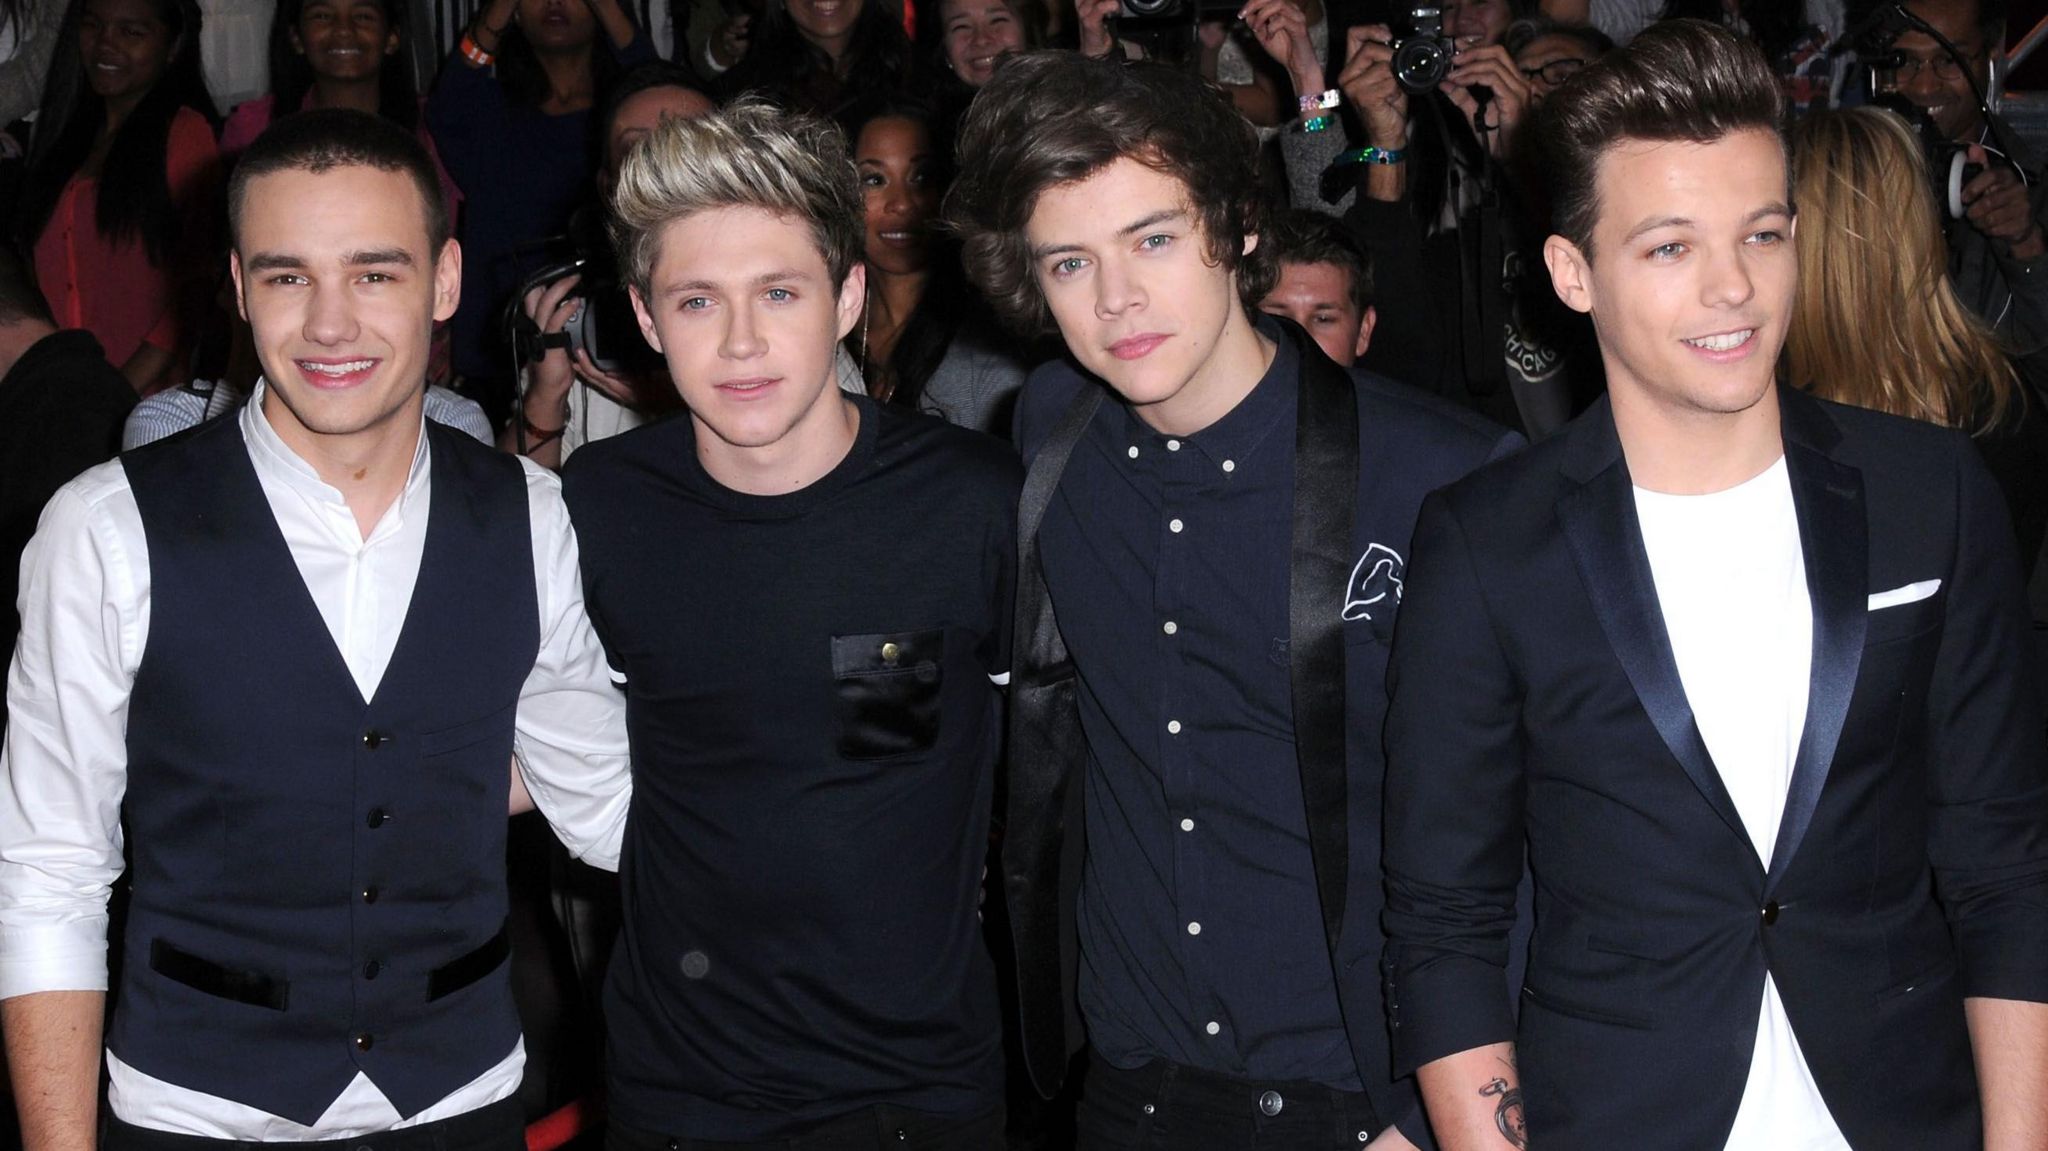  (L-R) Singers Liam Payne, Niall Horan, Harry Styles and Louis Tomlinson of One Direction attend the season finale of Fox's 'The X Factor' at CBS Television City on December 20, 2012